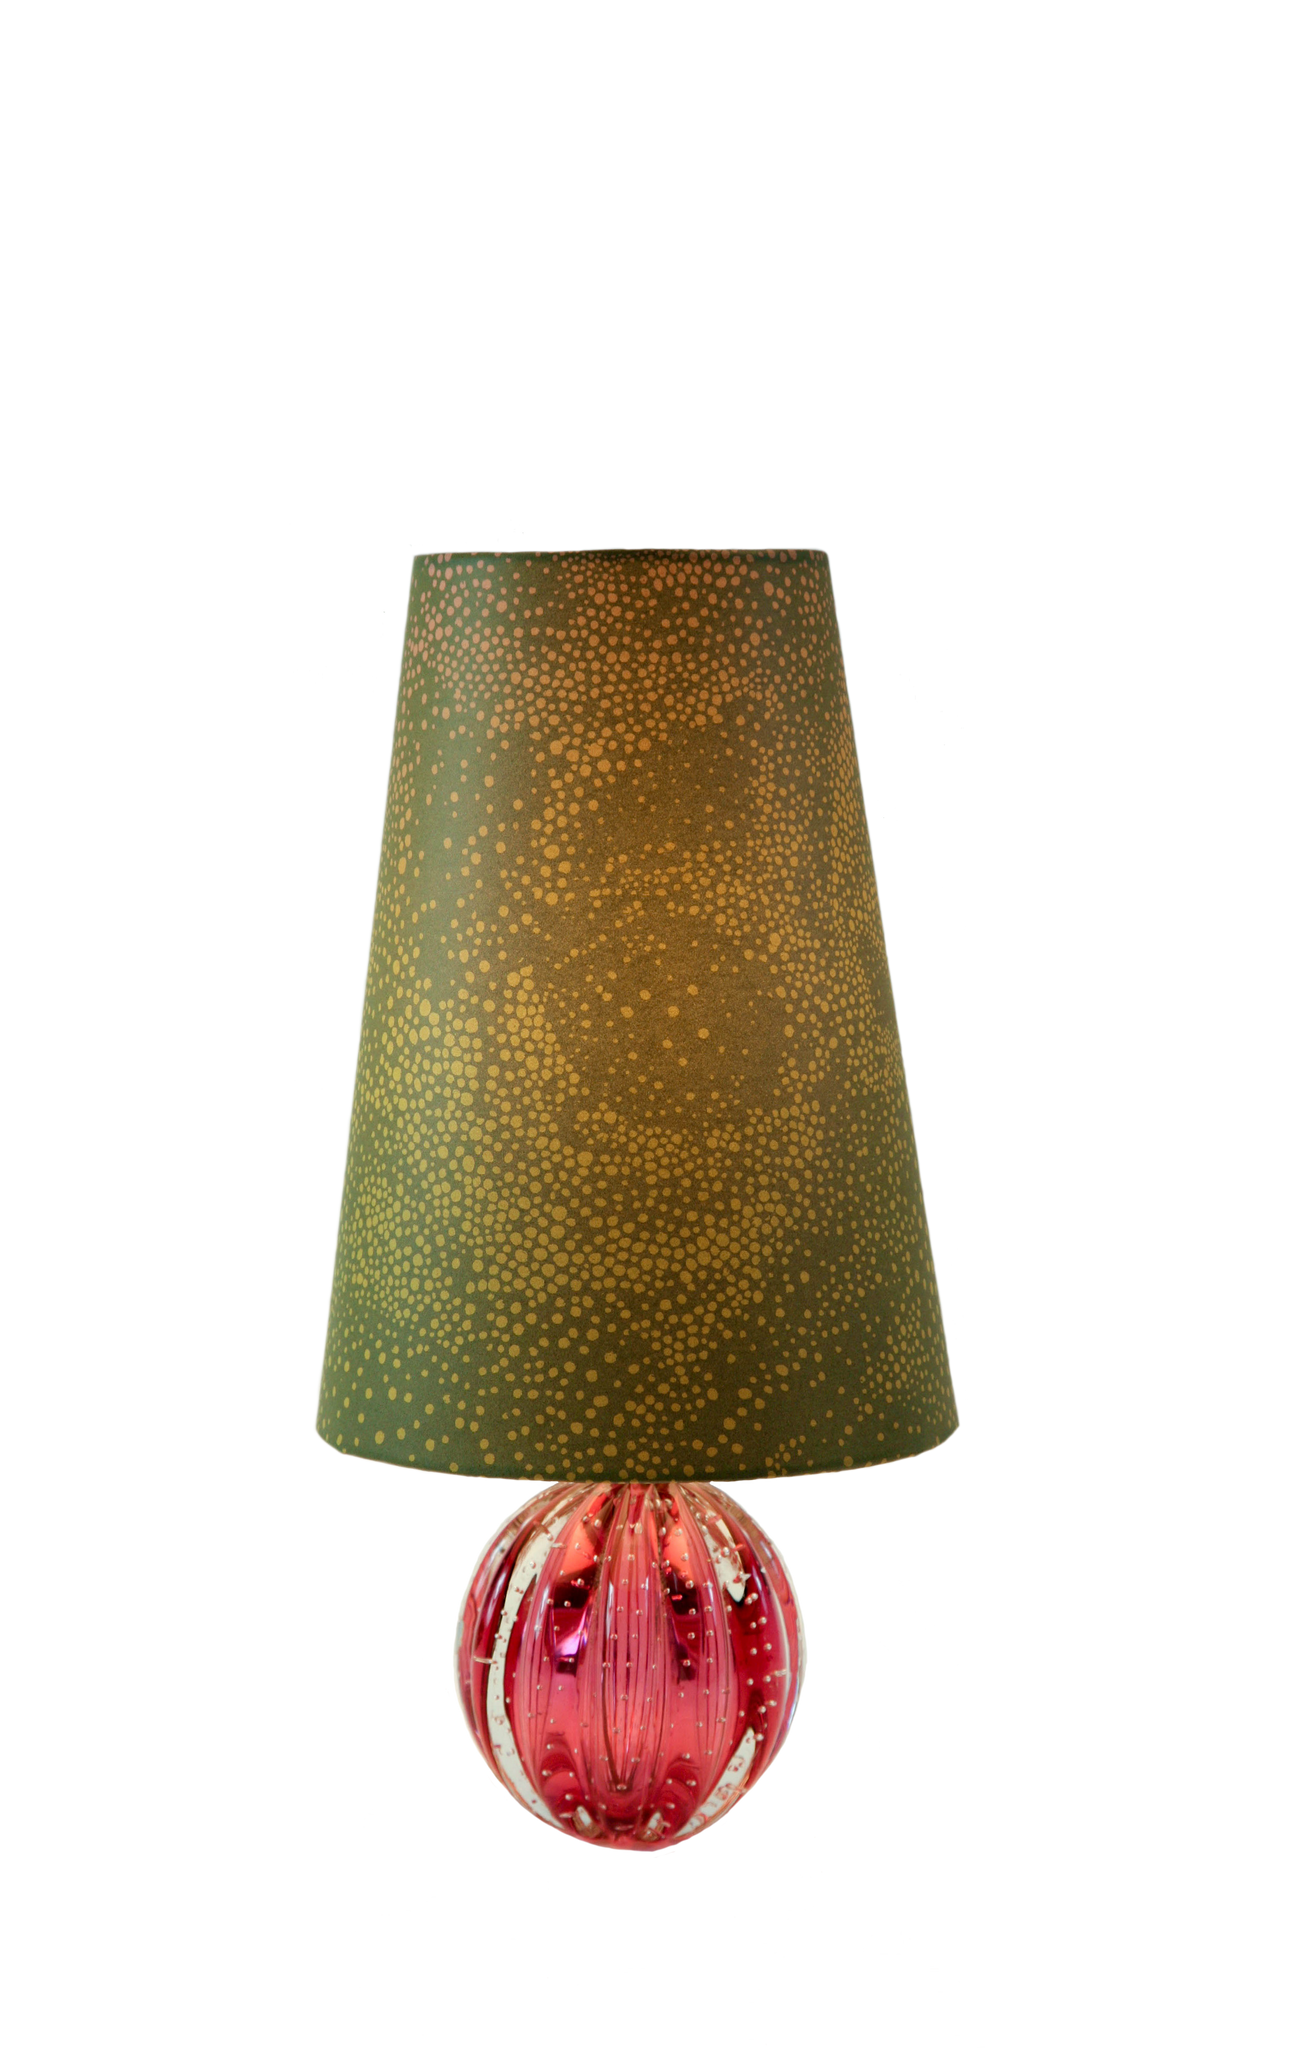 Aurora olive pink paper cone large lampshade with lamp stand (not for sale) by GvE&Co